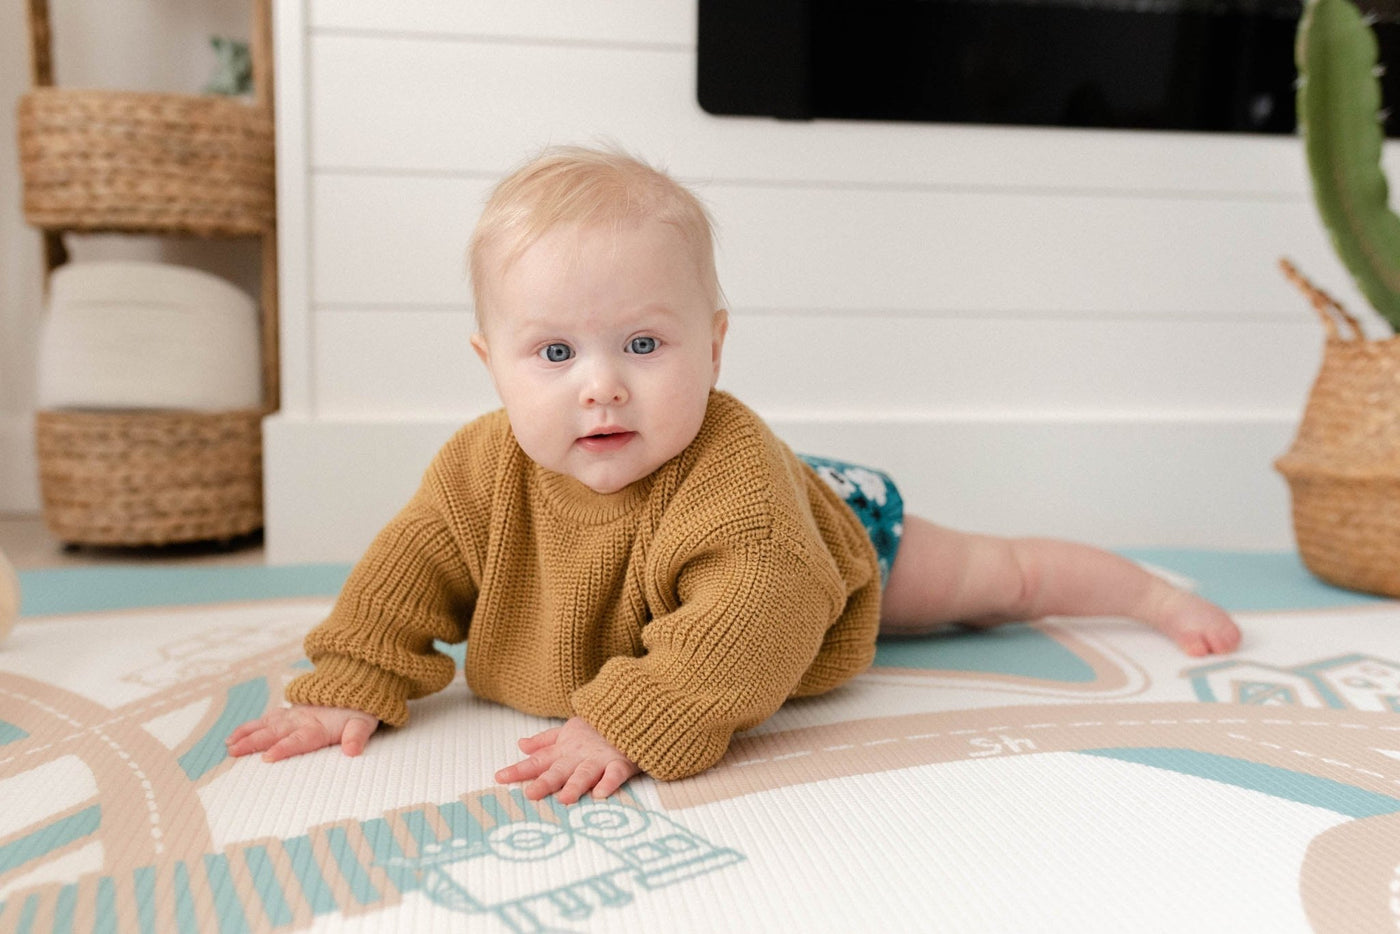 August Rose Sand Playmat - For Home and Play